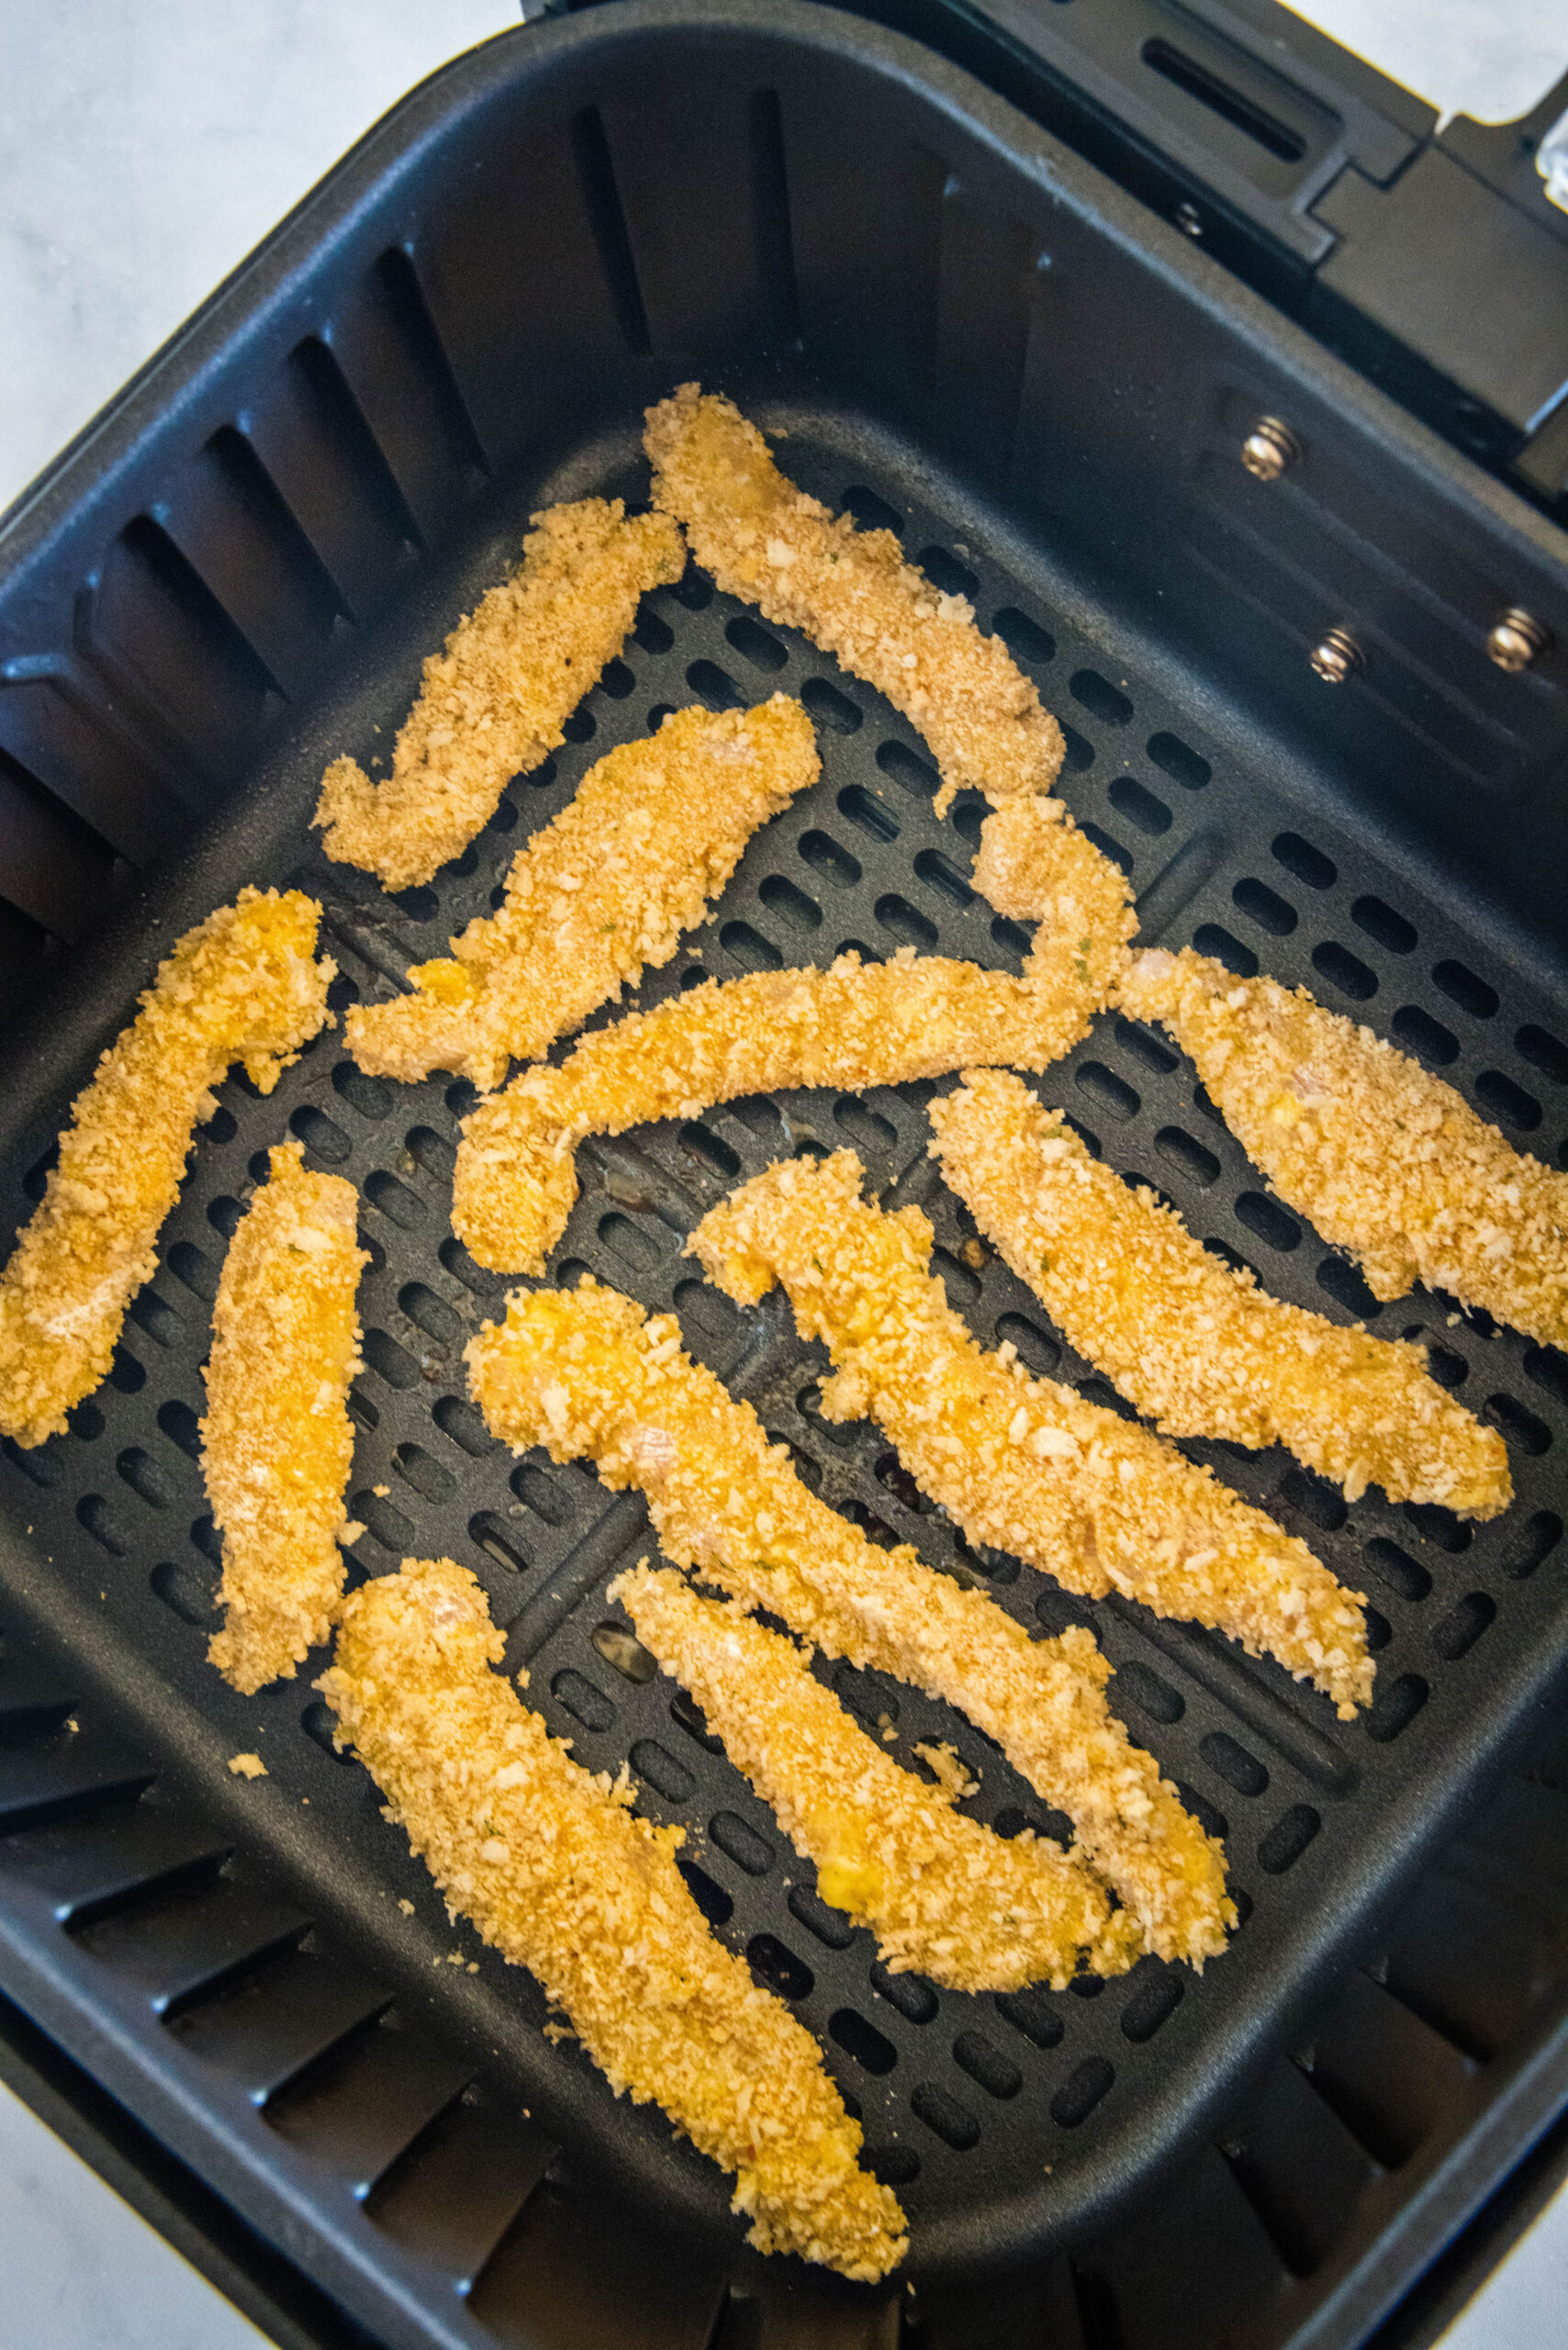 Overhead view of chicken fries inside the air fryer basket.